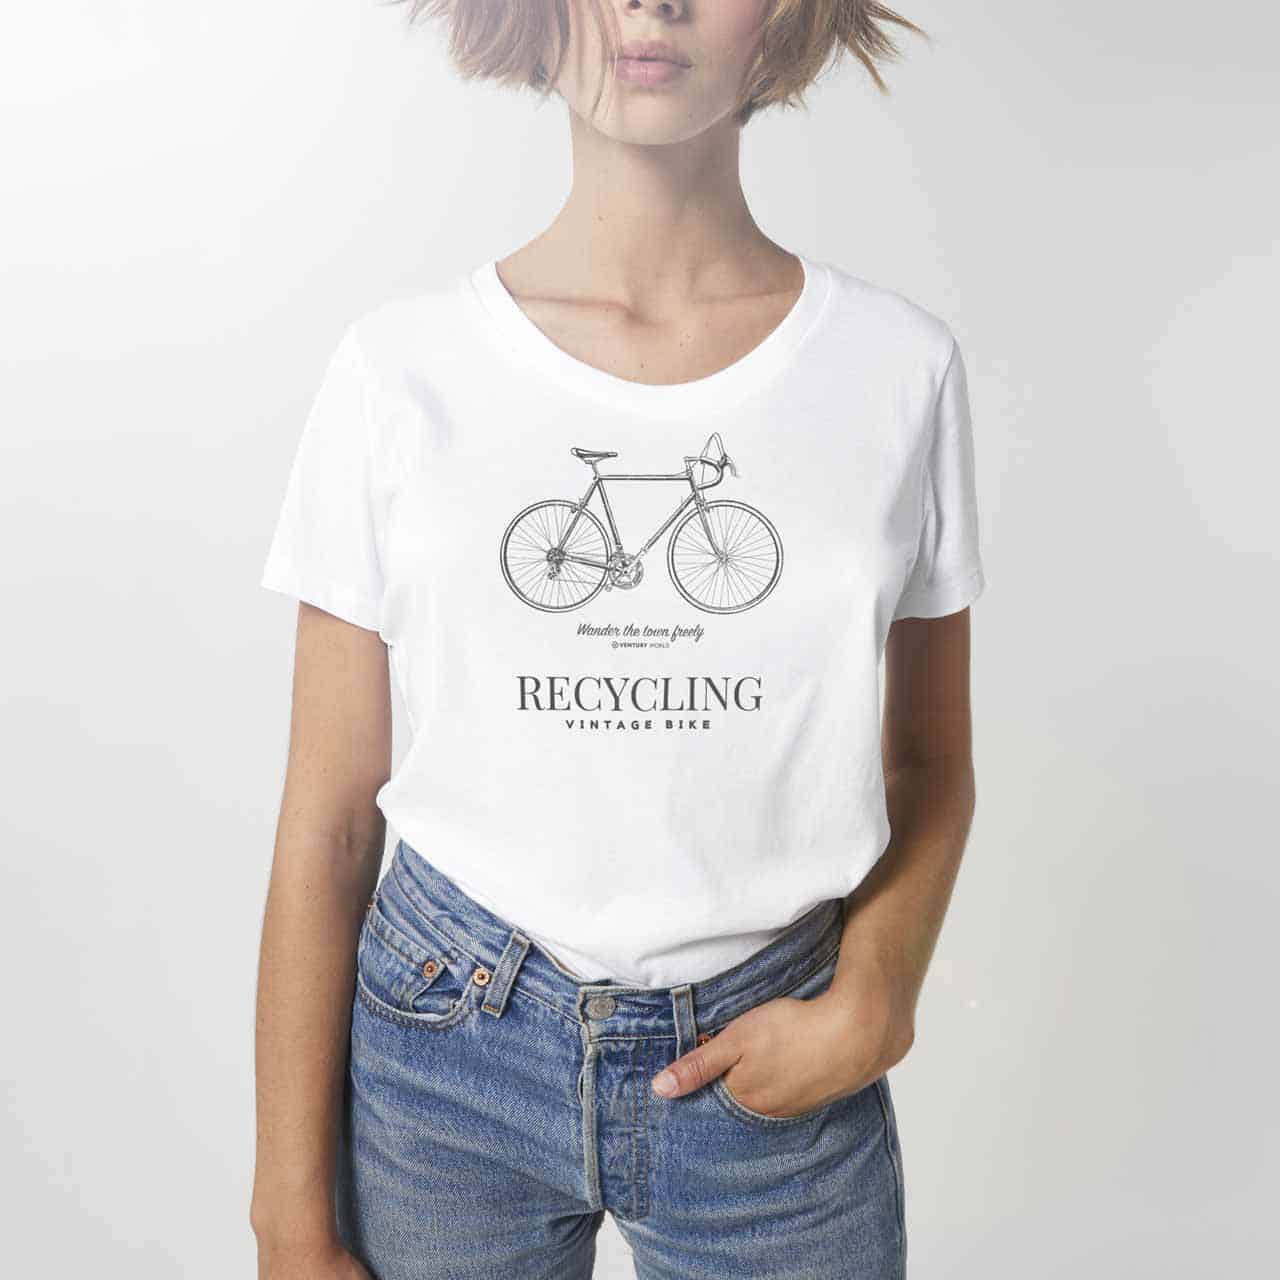 T-shirt-cycling - Vintage race Bike - Wander the town freely - Ventury World - Collection live freely femme 100% naturel coupe ajustée grand col rond.